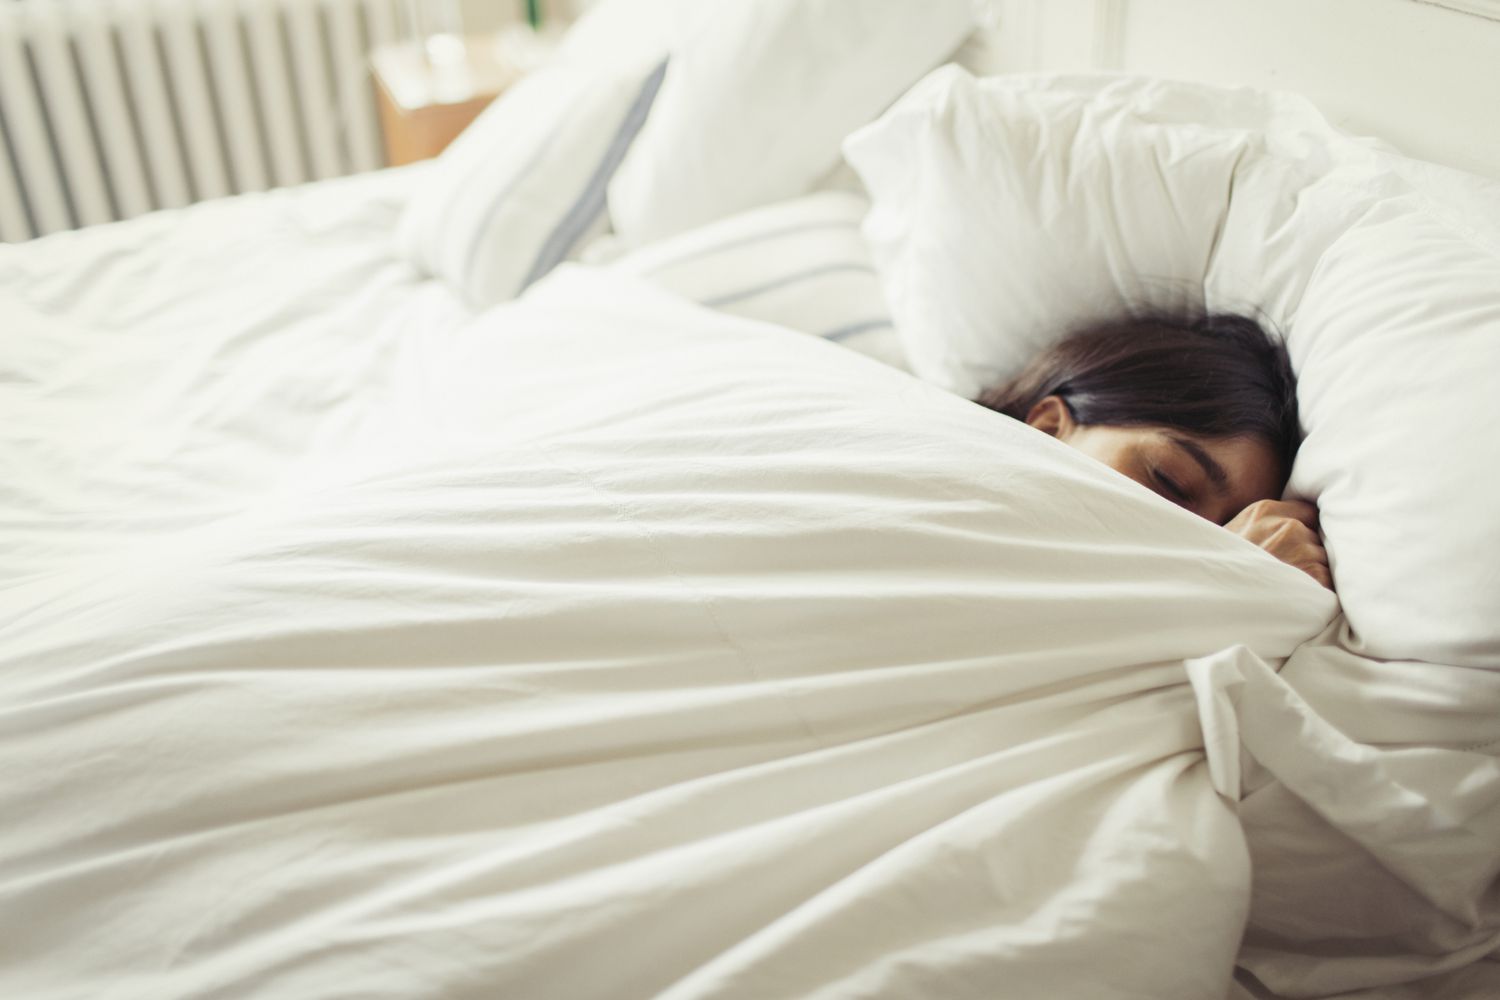 7 Negative Health Effects Of Too Much Sleep